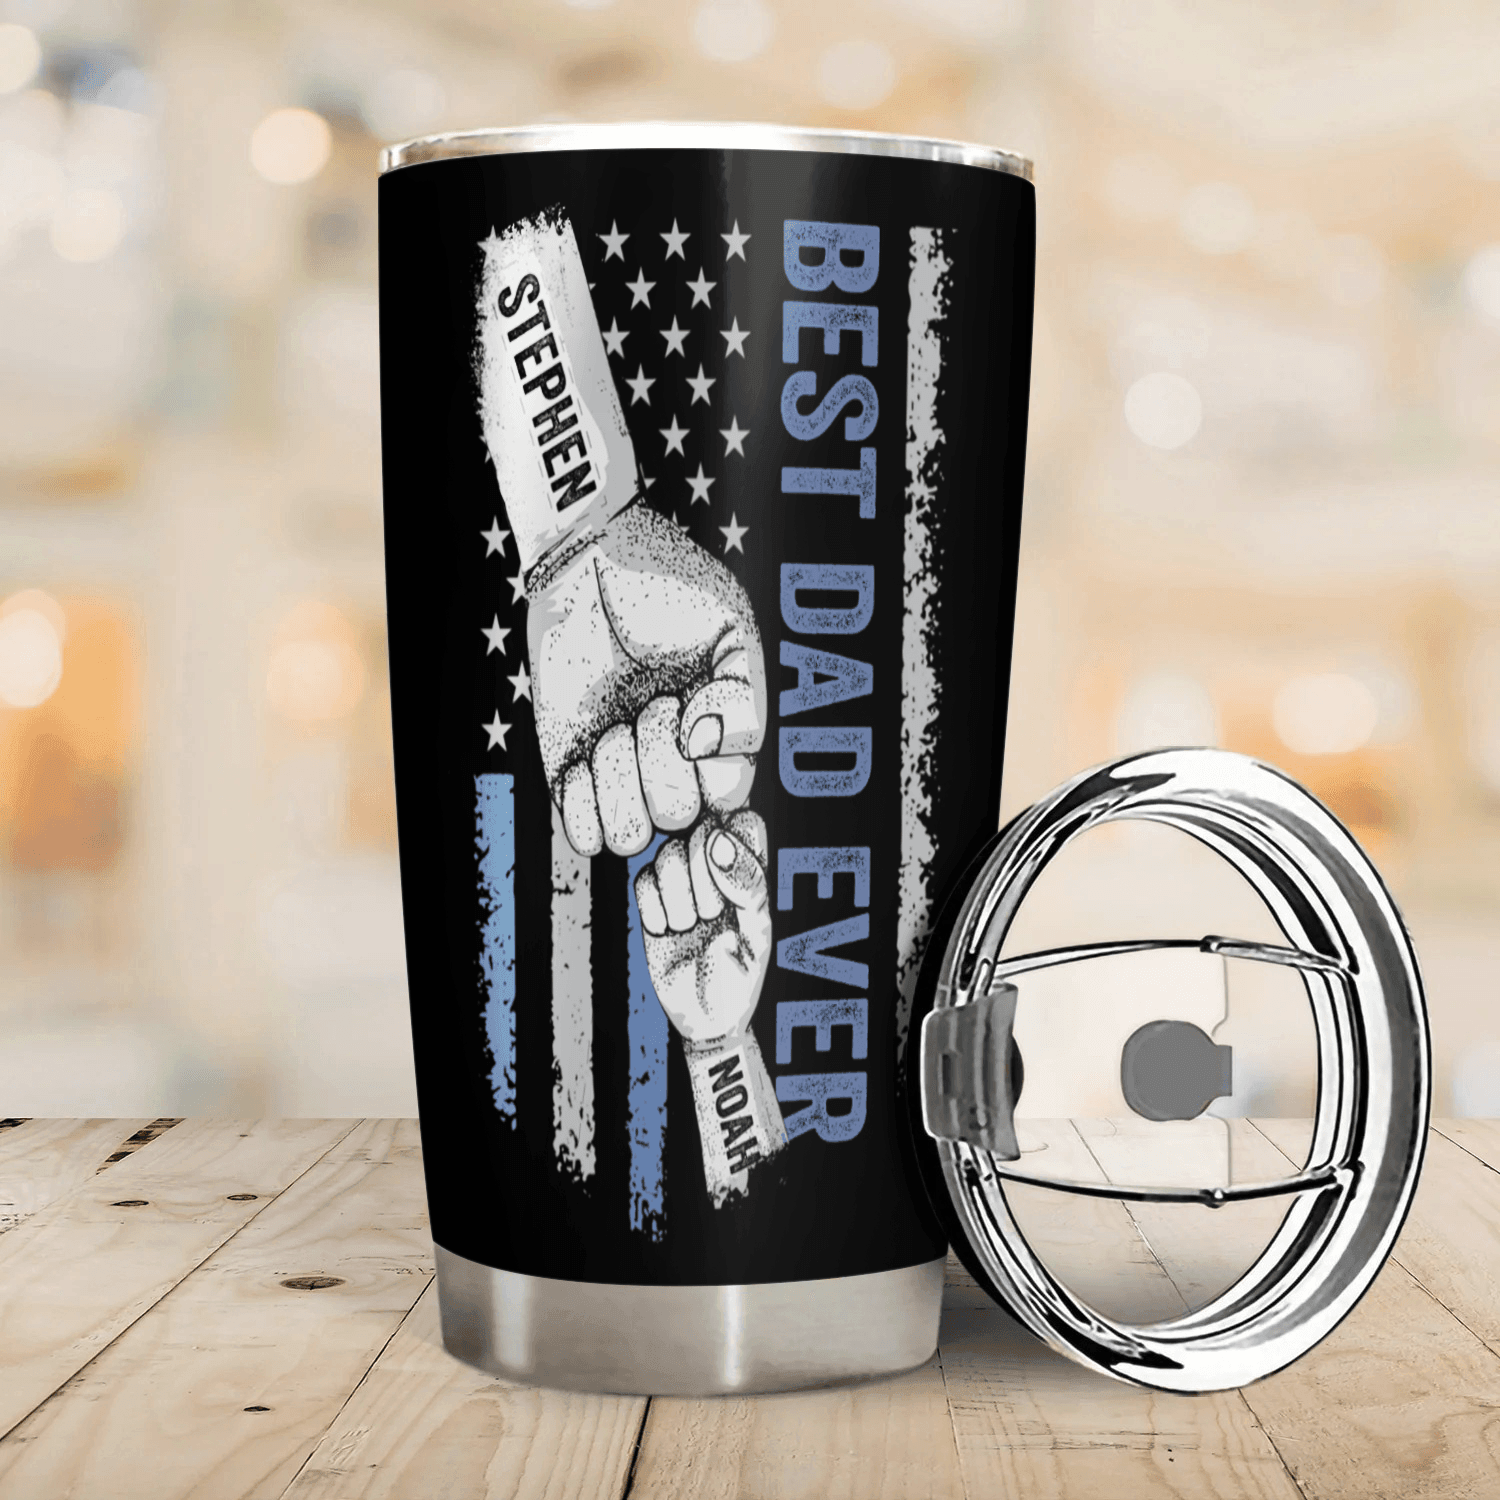 Best Dad Ever Raised Fist Bump - Personalized Custom 20oz Fat Tumbler Cup - Father's Day Gift for Dad, Grandpa, Daddy, Dada, Dad Jokes - Suzitee Store